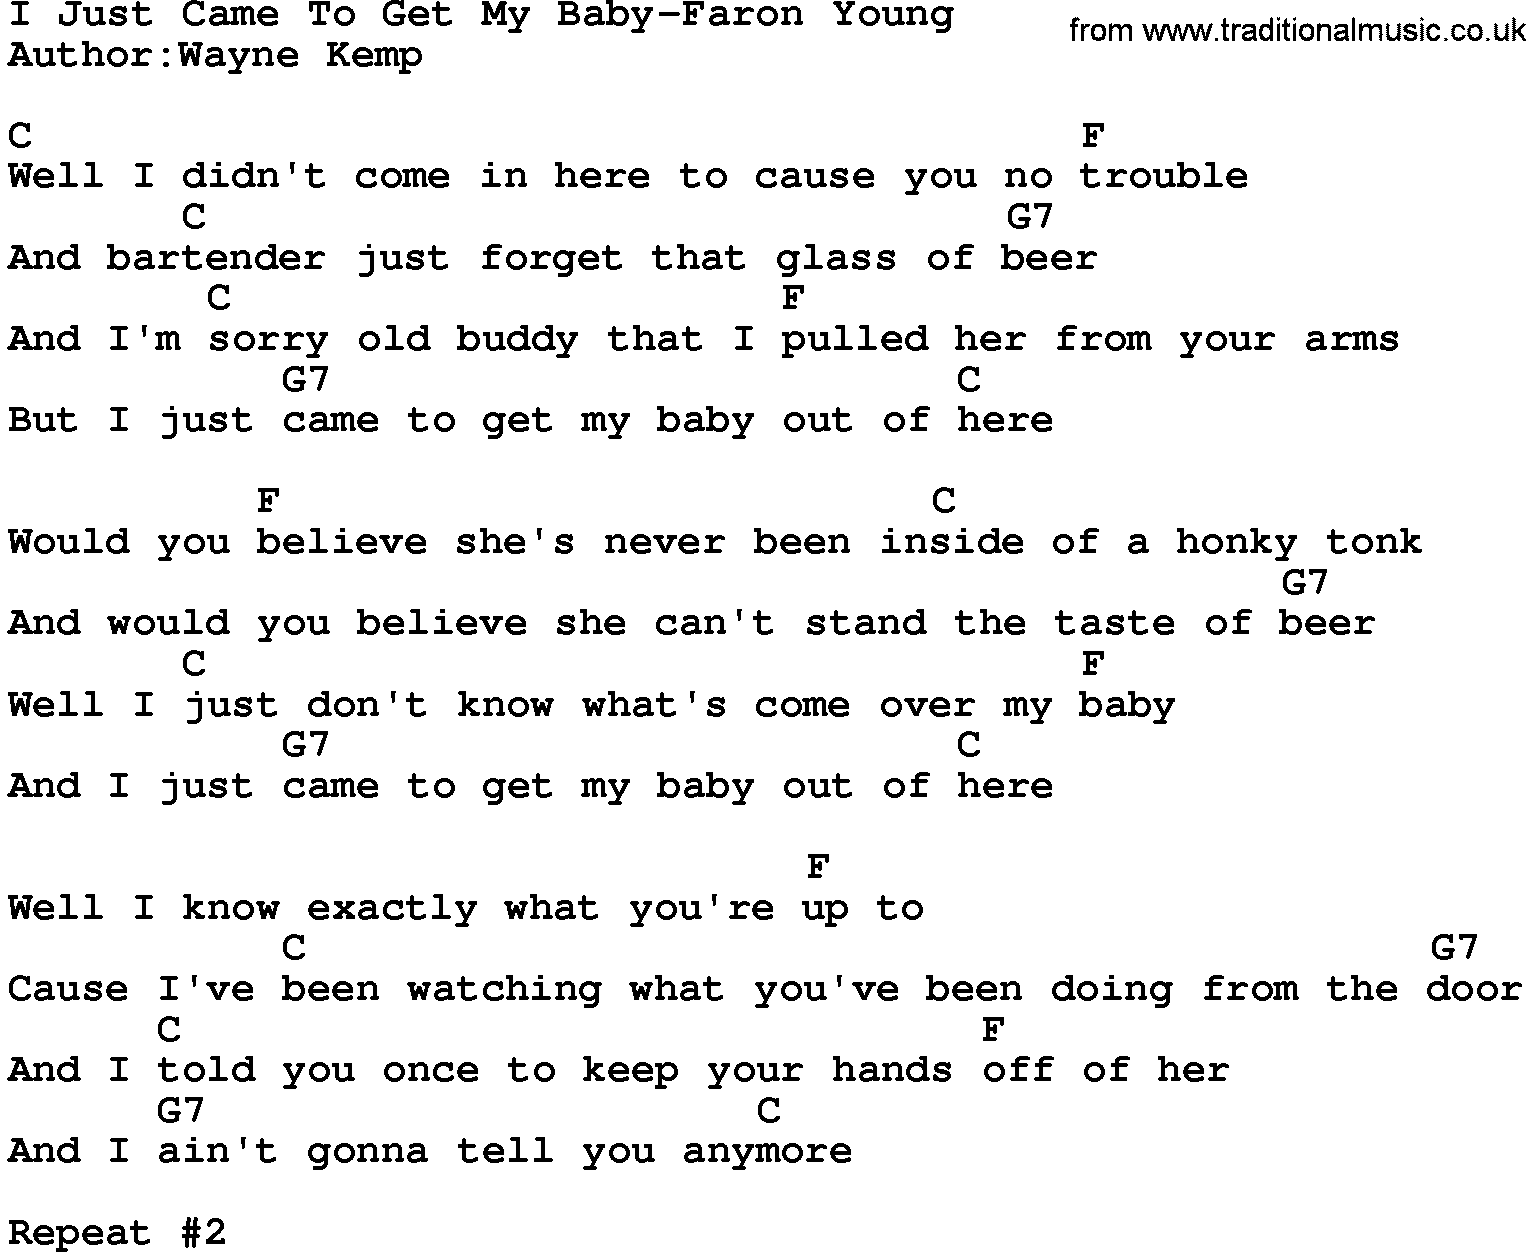 Country music song: I Just Came To Get My Baby-Faron Young lyrics and chords